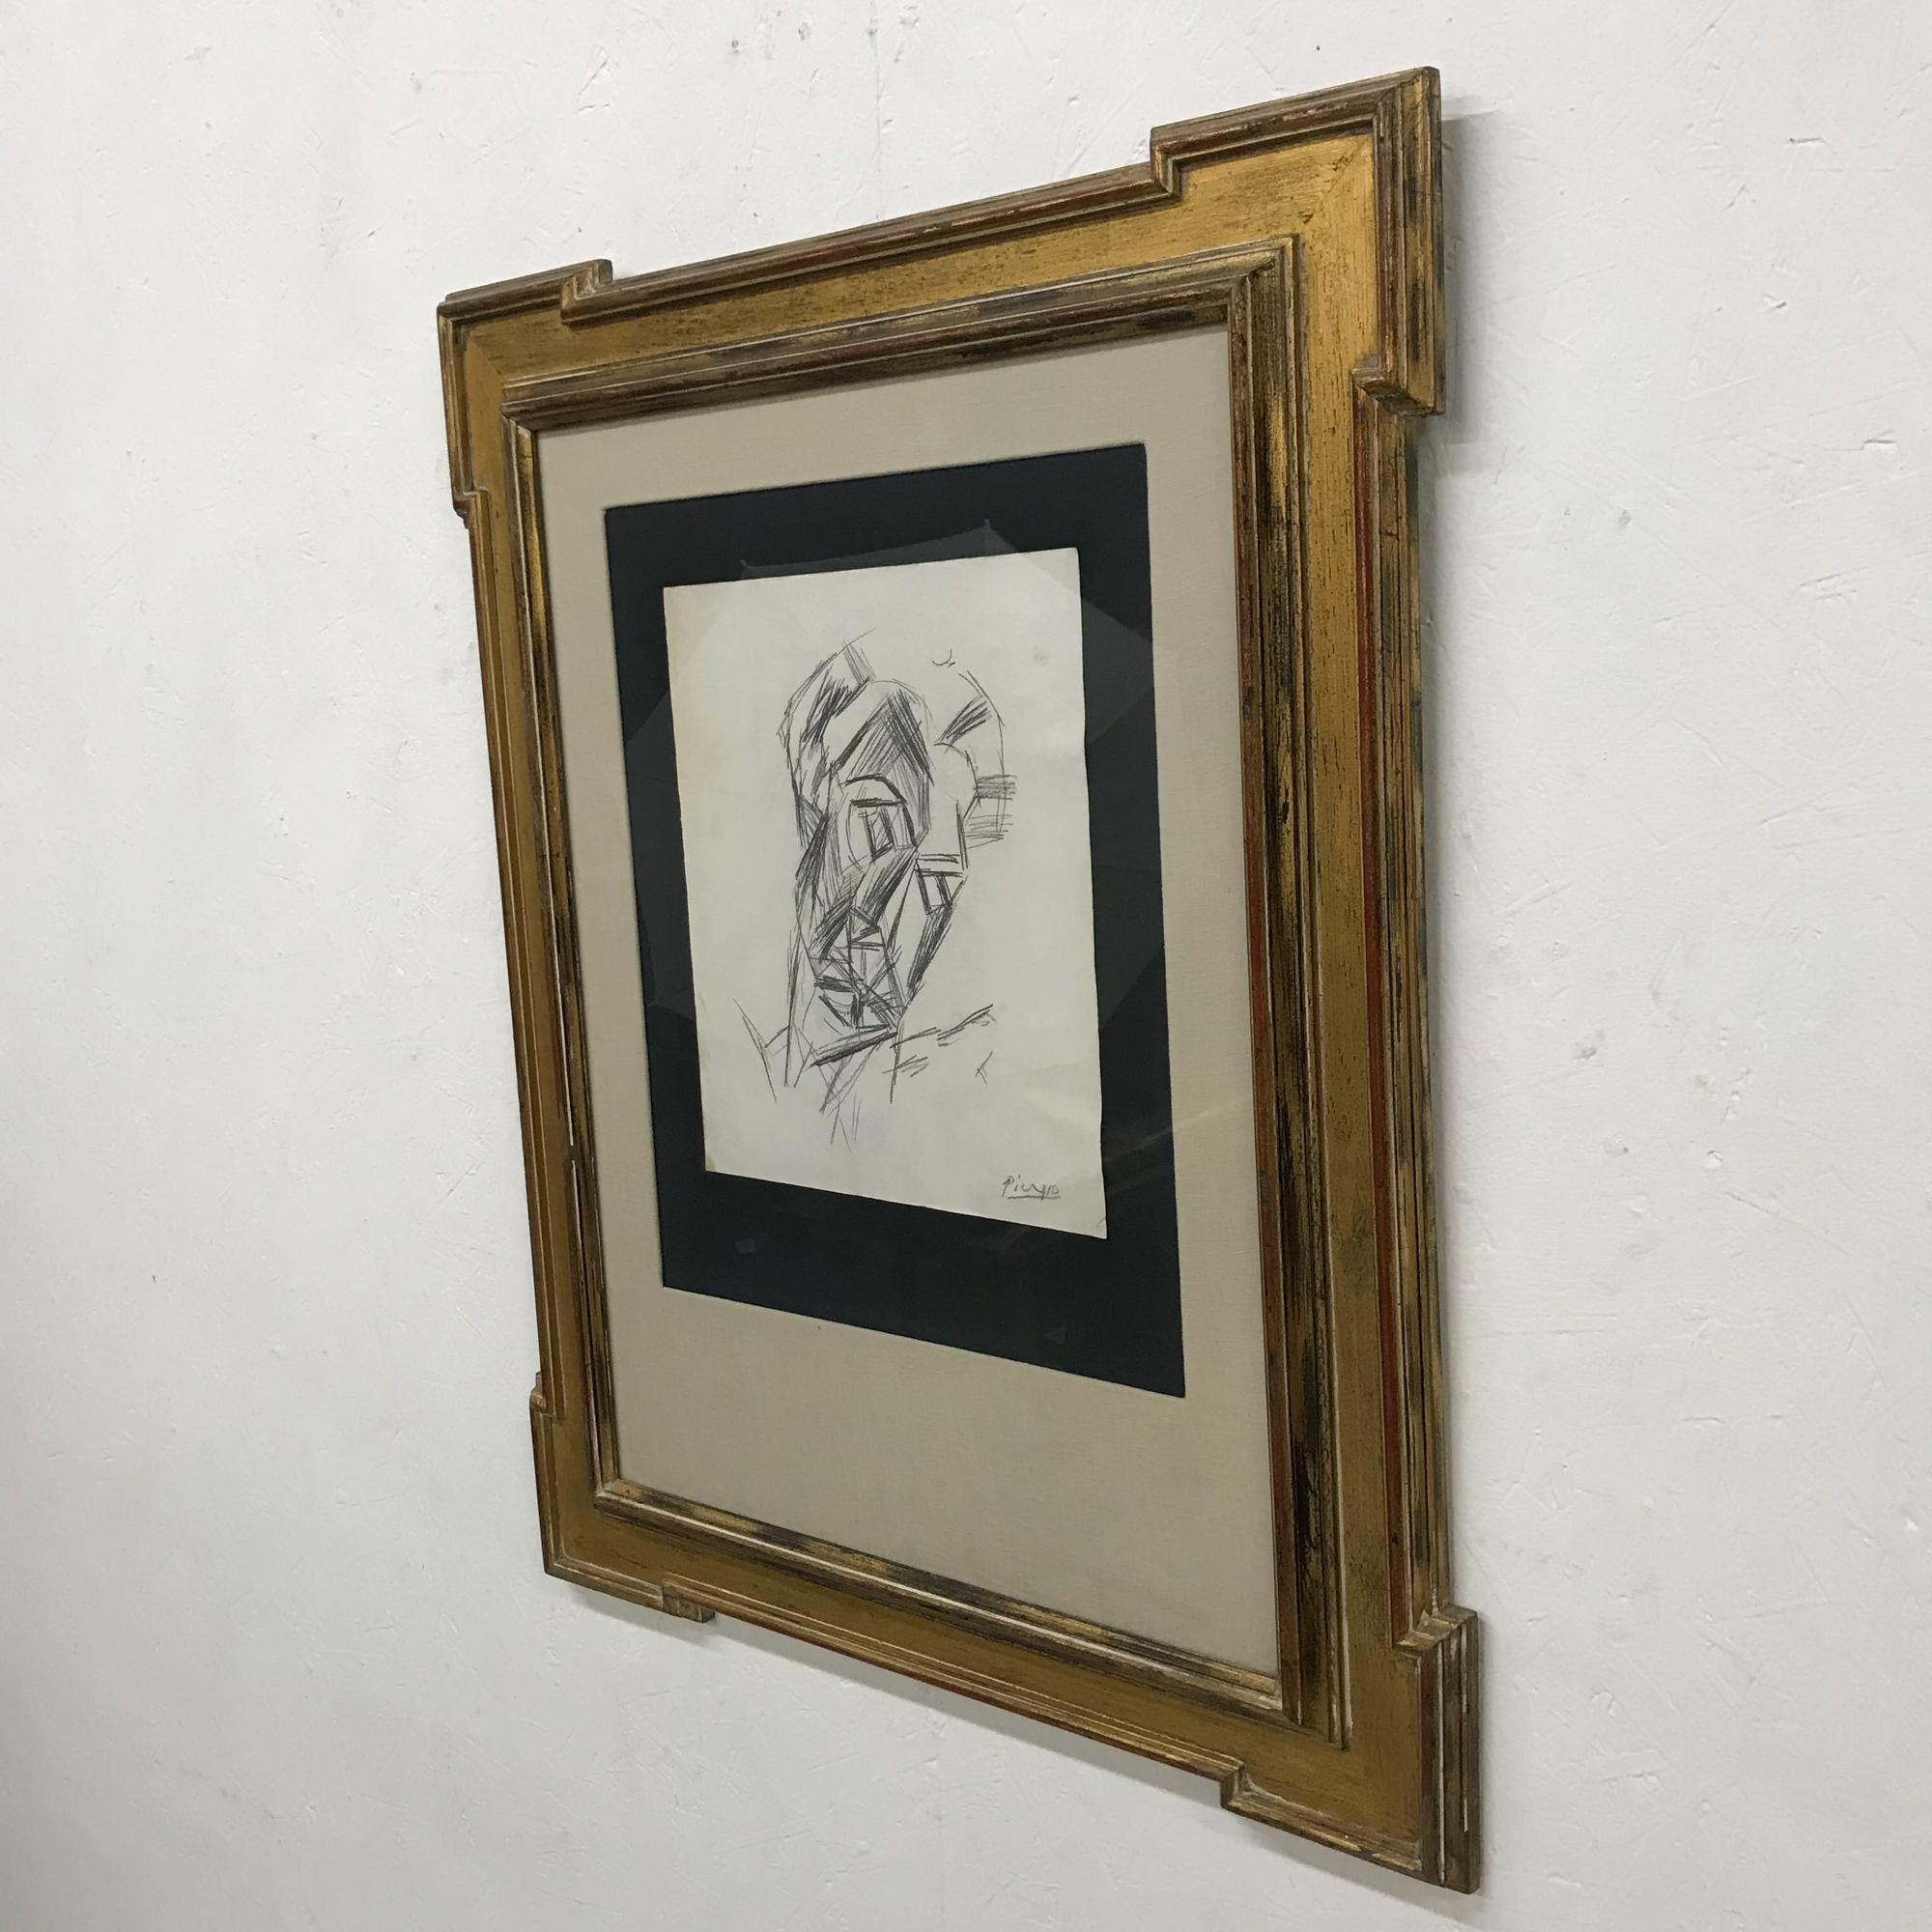 For your consideration a wall art pencil on paper. The art is signed on the lower right corner : “PICASSO”. I don’t have a COA, I can not guarantee its authenticity. 
Art is sold as is, in the condition I found it. 
Dimensions: 24